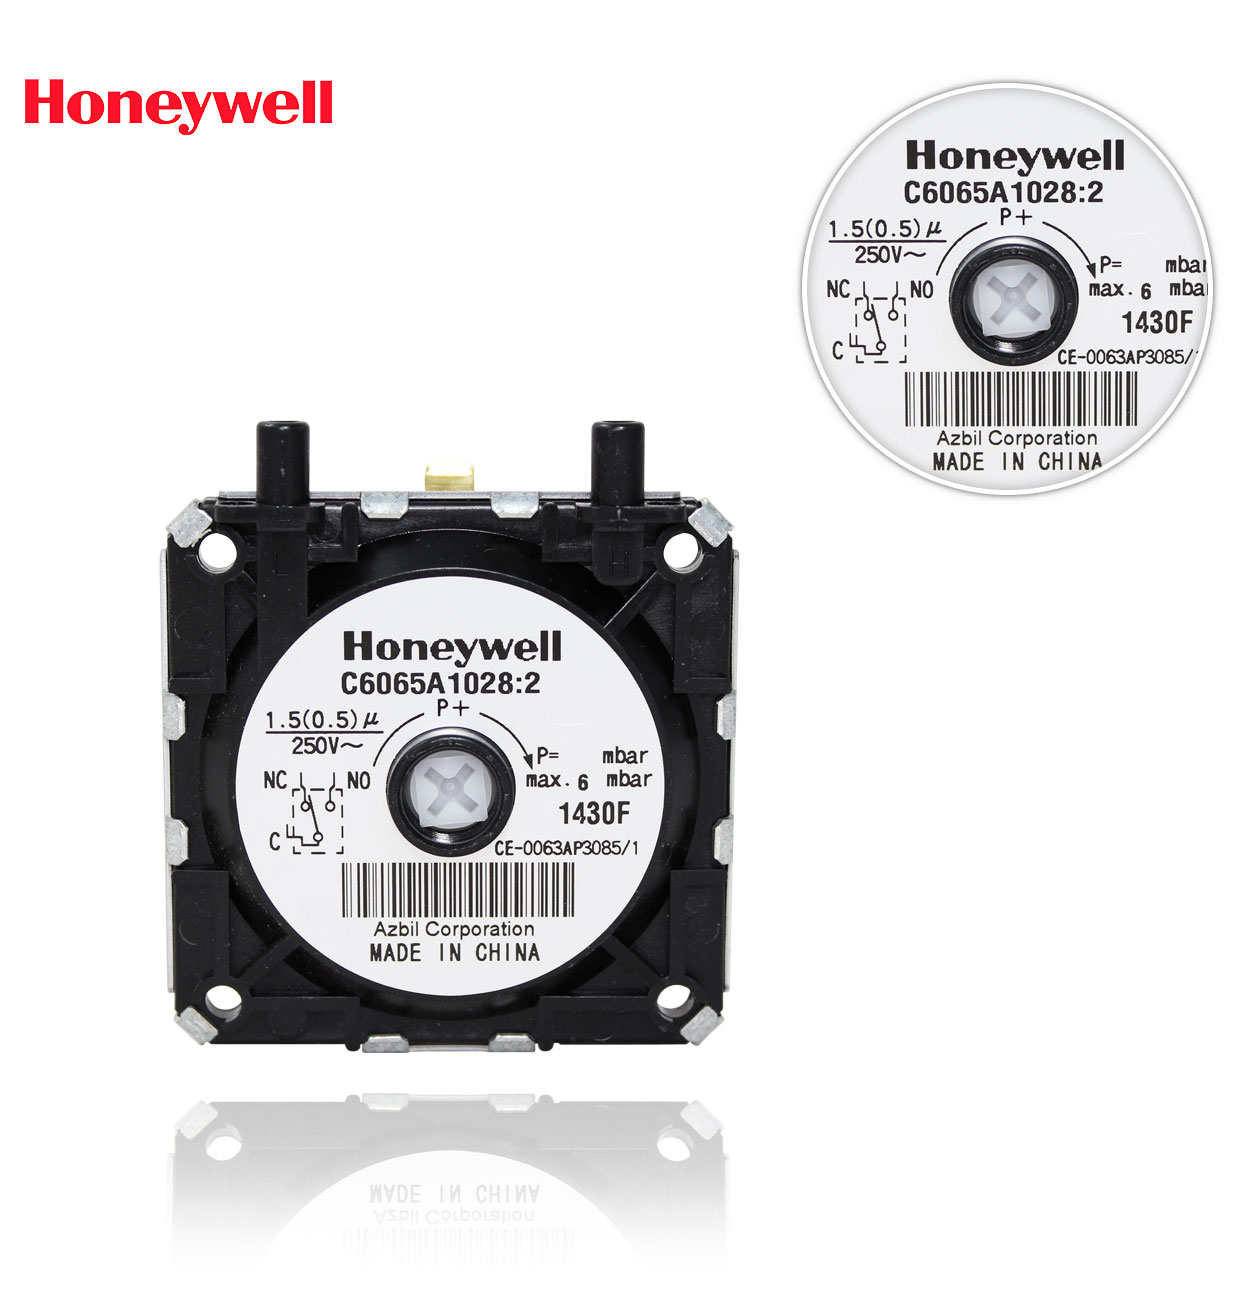 C 6065 A 1028 HONEYWELL adjustable DIFFERENTIAL PRESSURE SWITCH